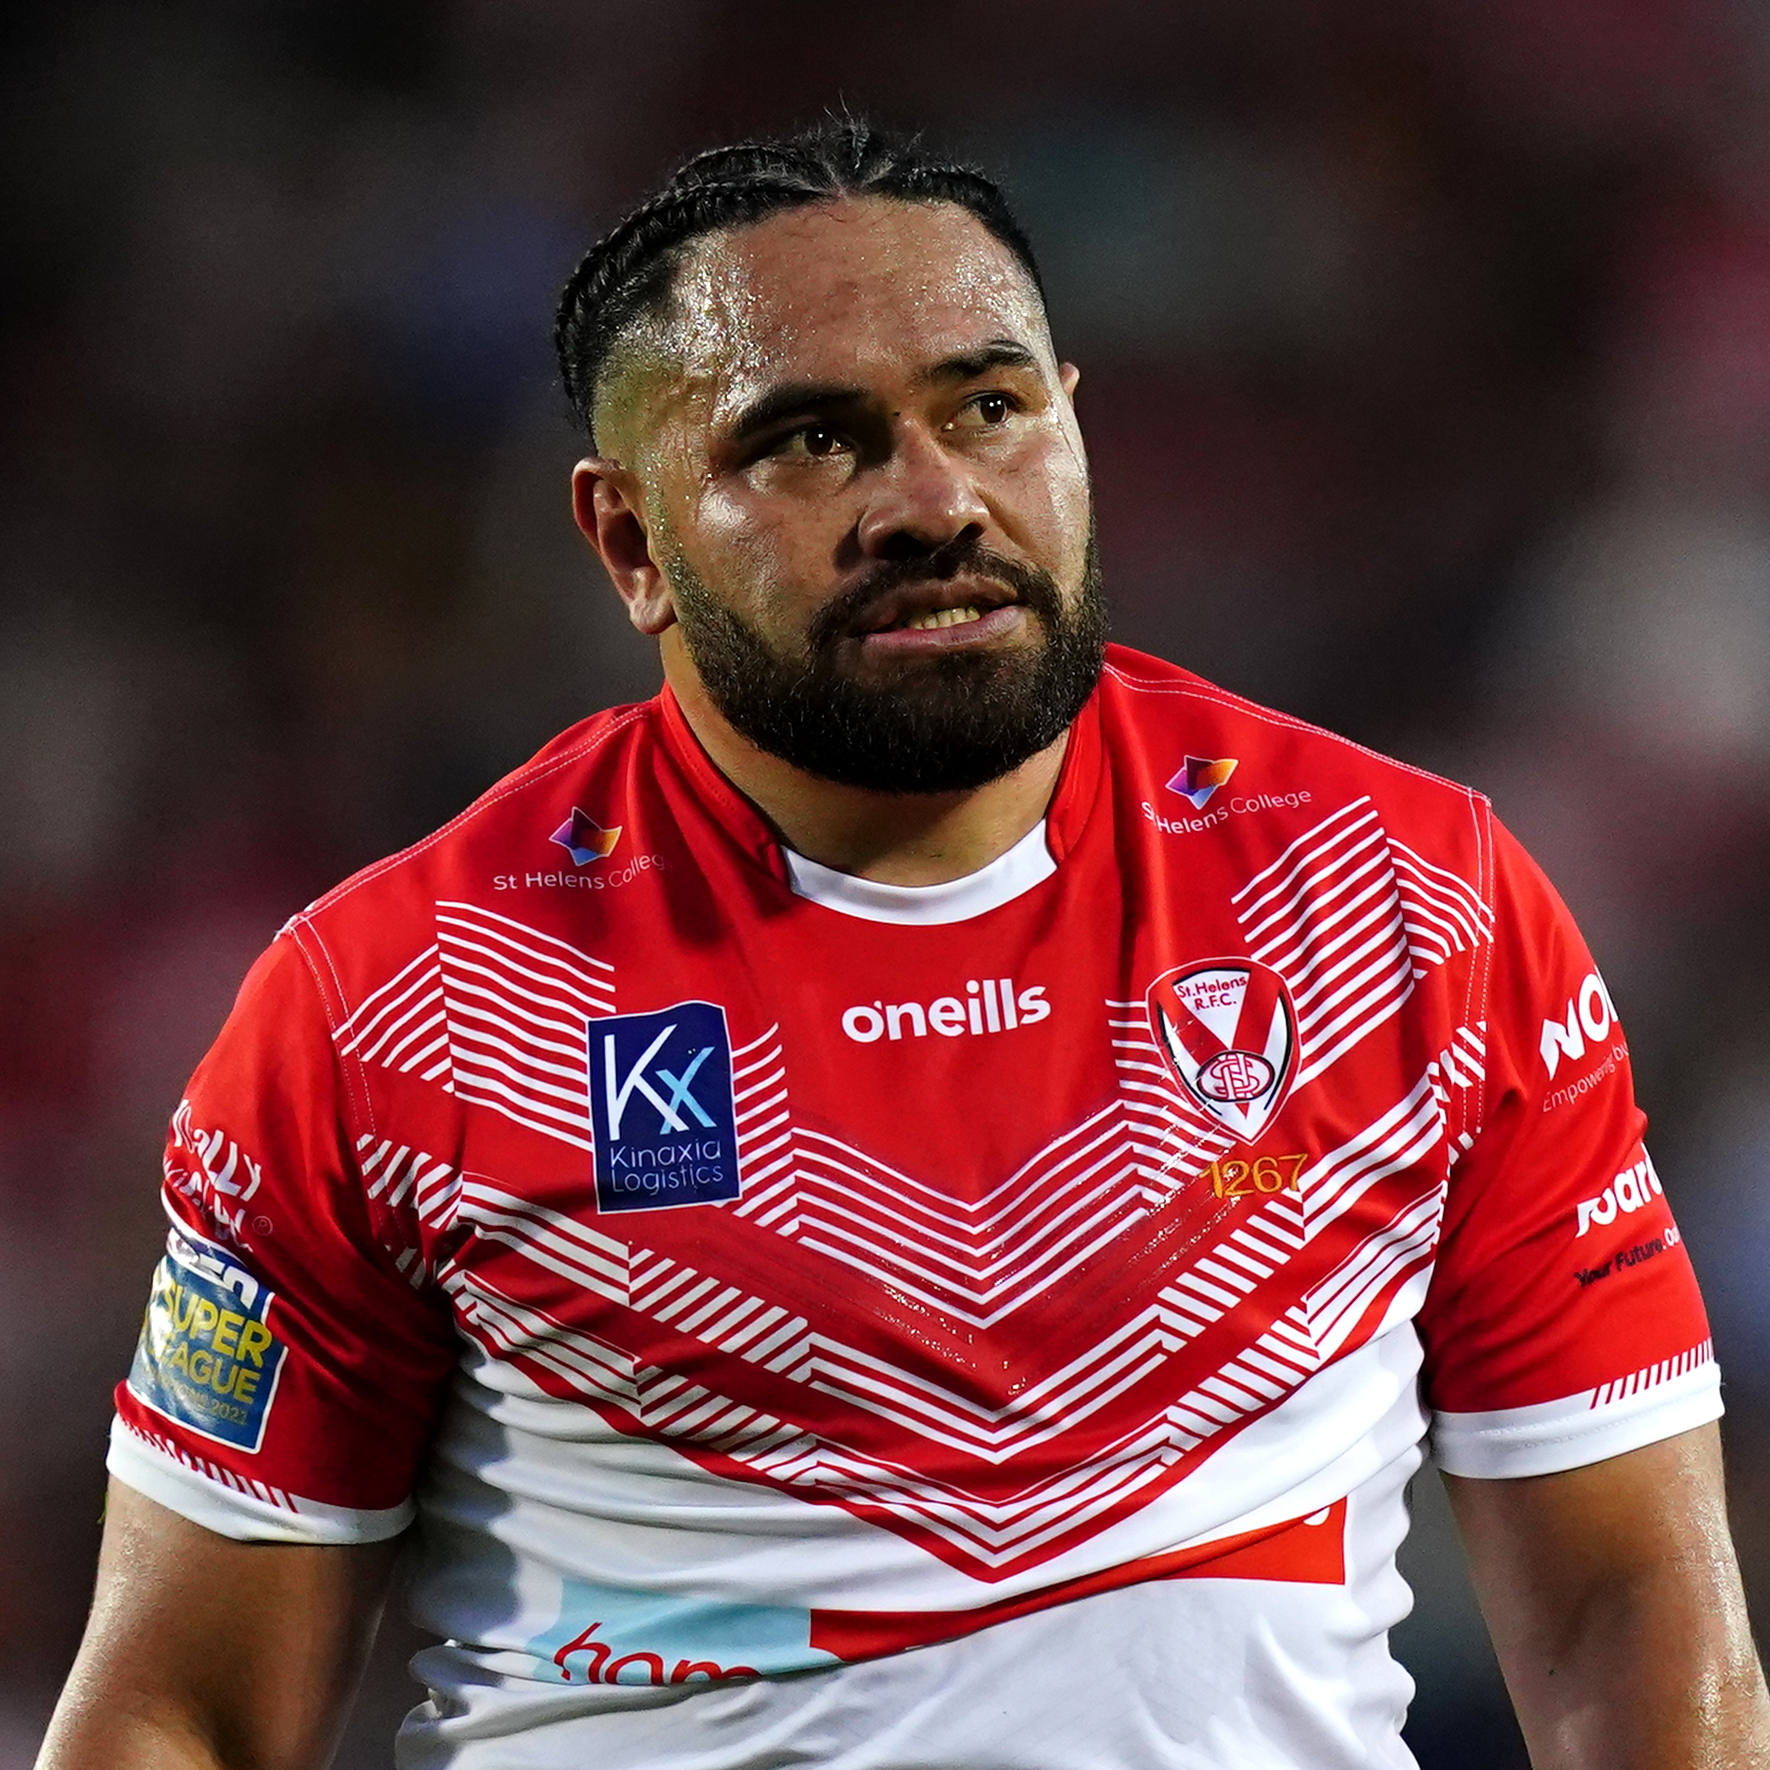 Interview with St Helens and Tonga centre Konrad Hurrell